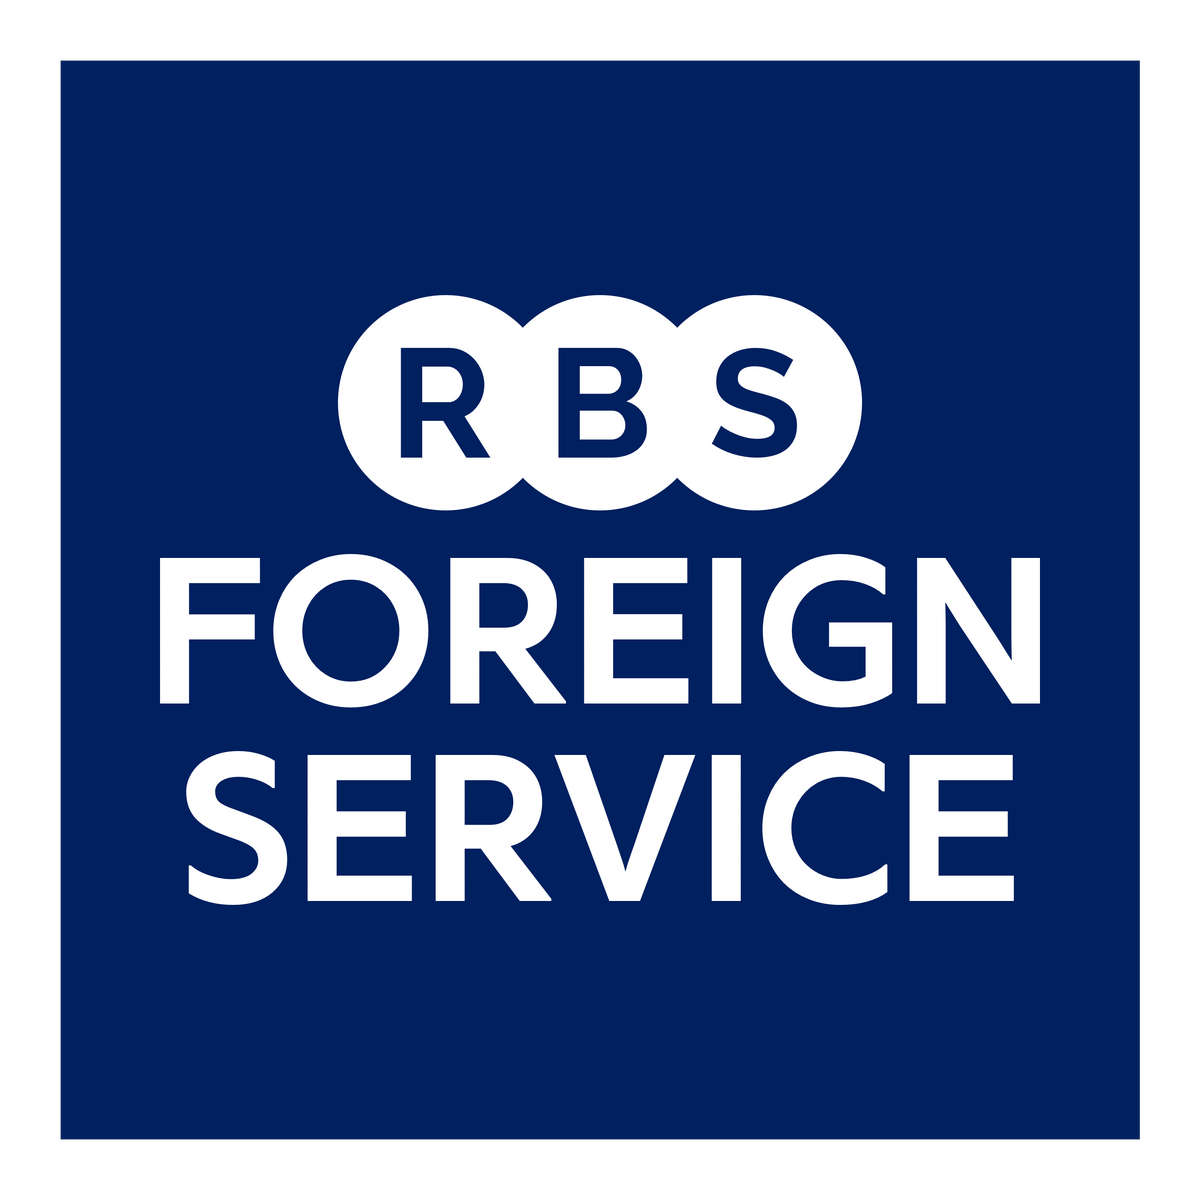 rbs travel services royalties